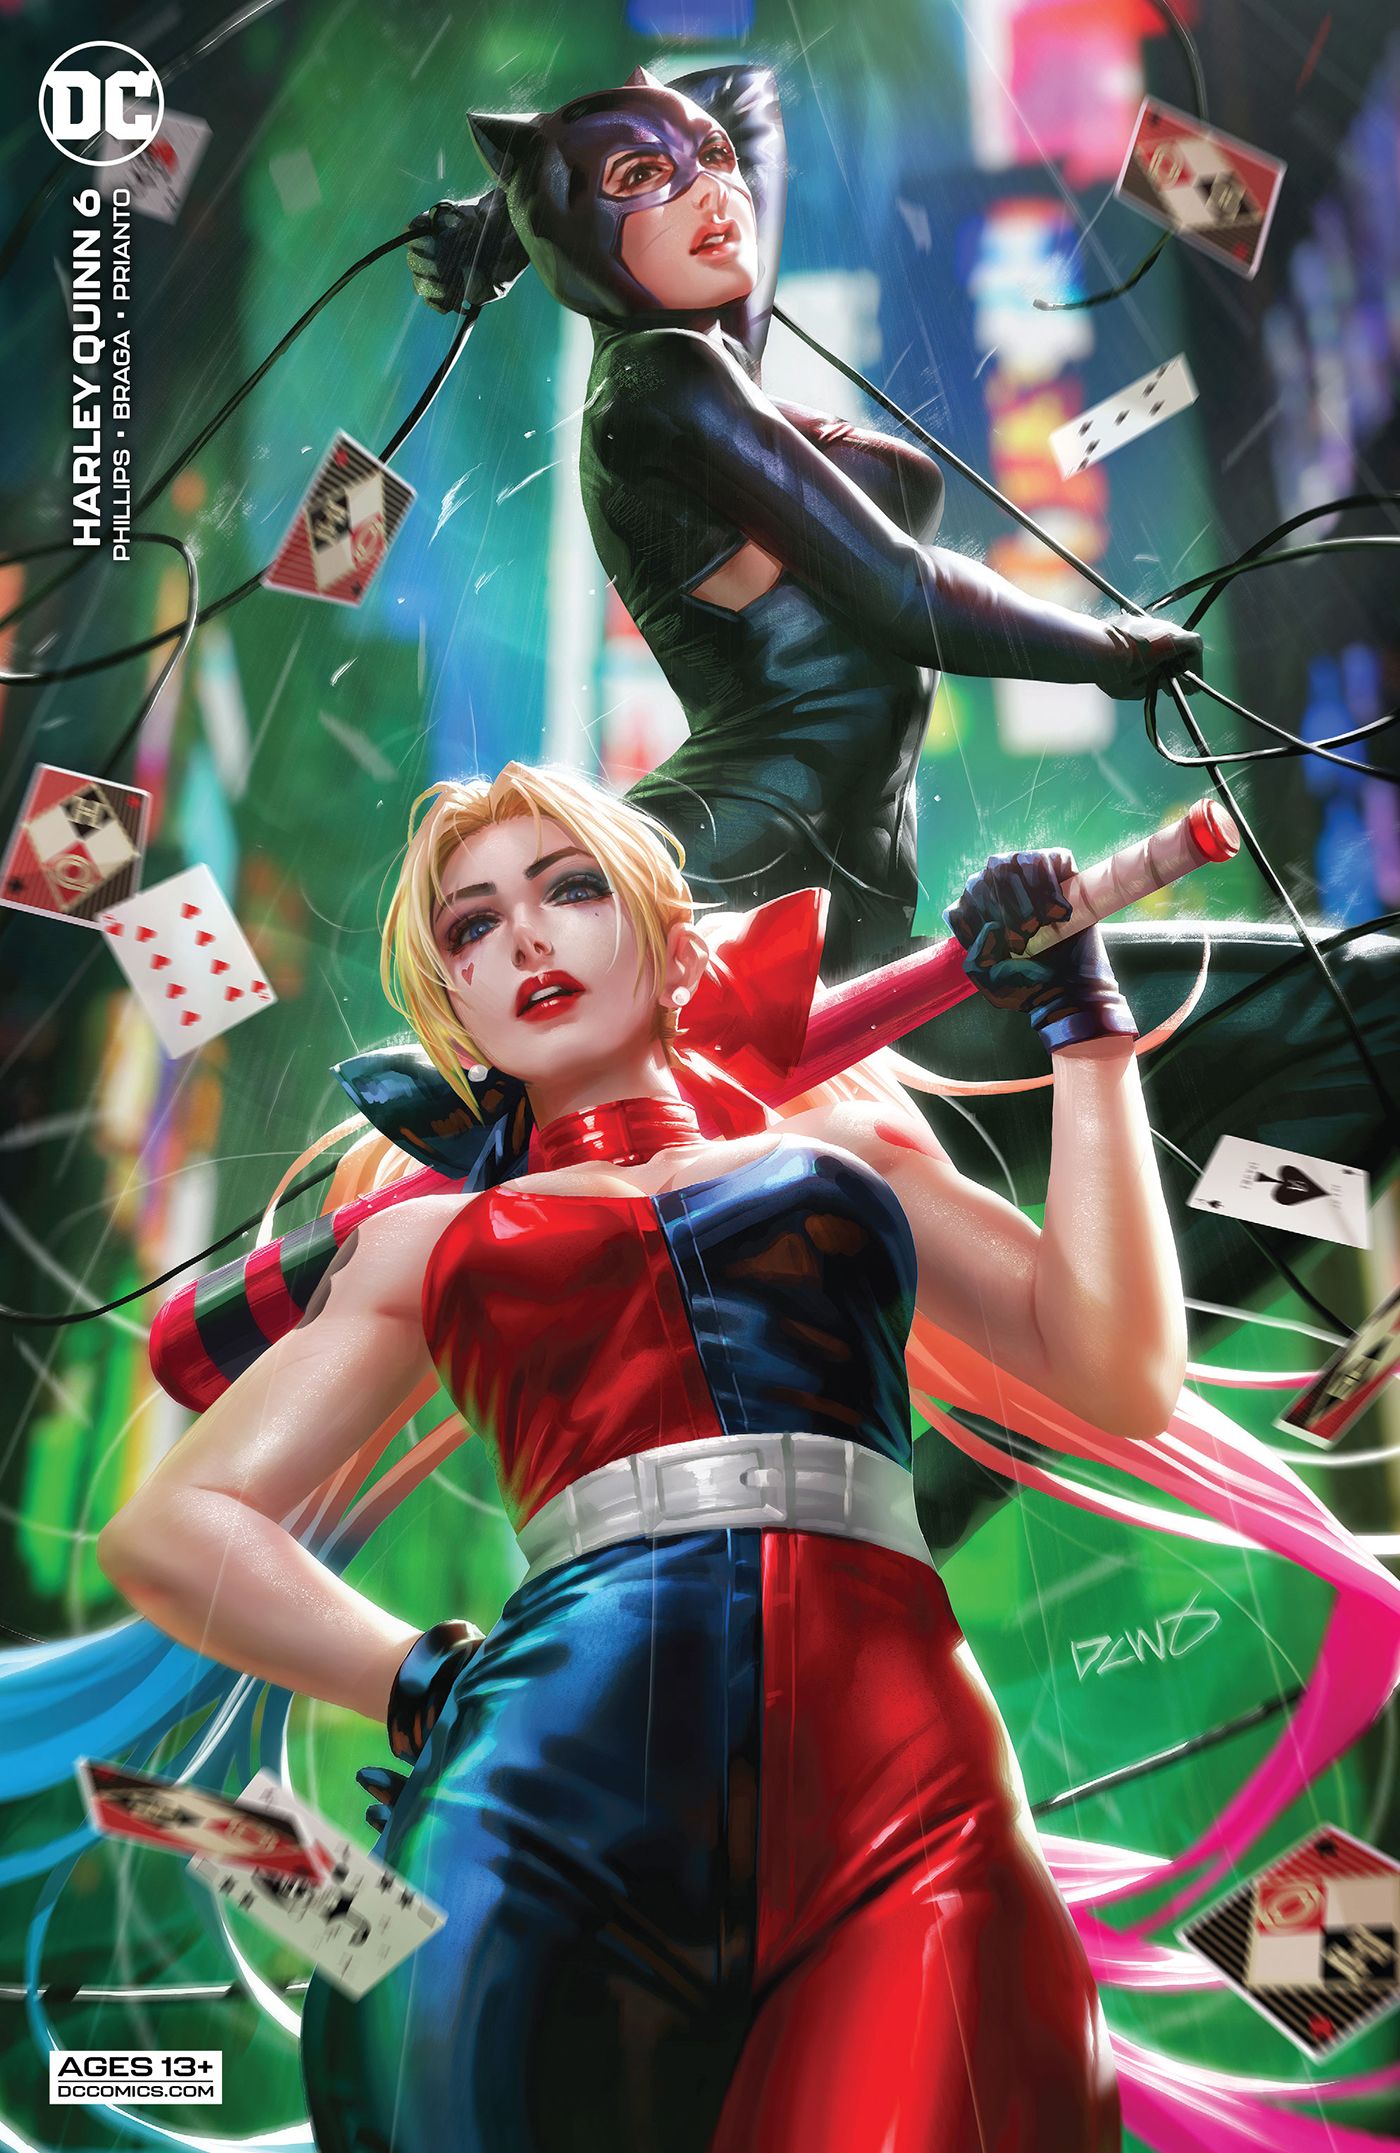 The cardstock variant cover for Harley Quinn #6 shows Harley with Catwoman.